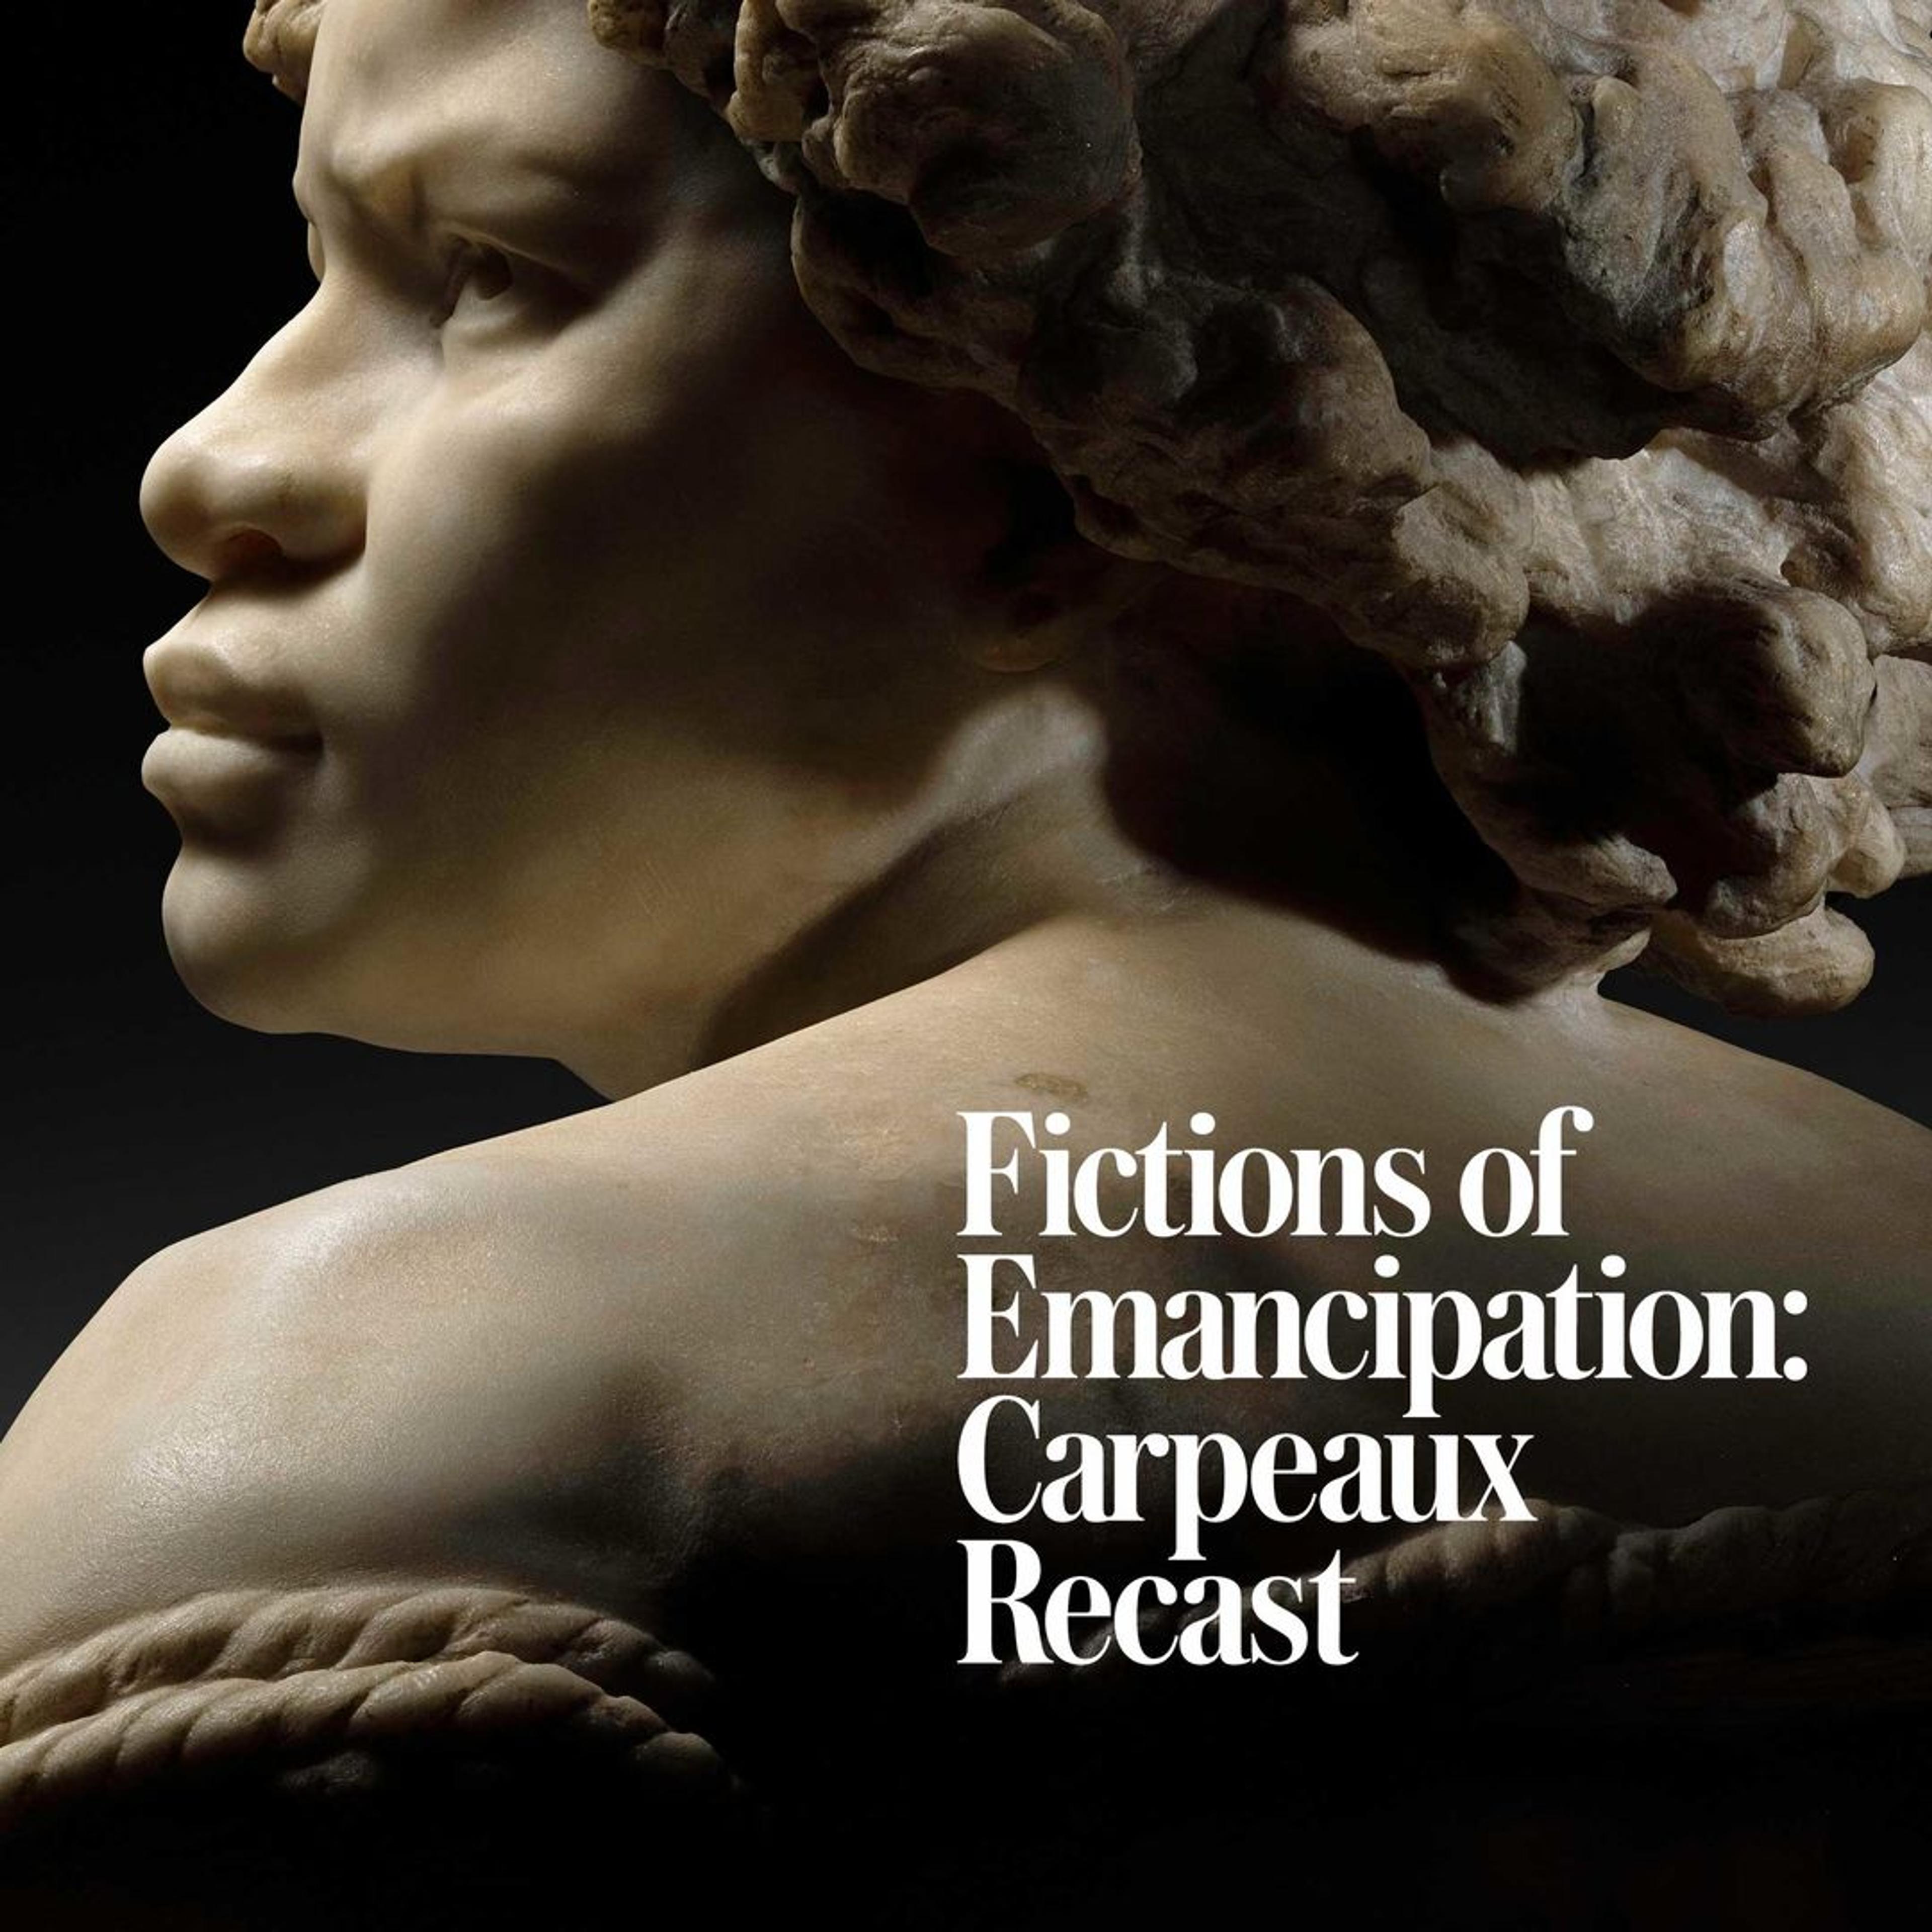 Exhibition promotional graphic for "Fictions of Emancipation: Carpeaux Recast" with Carpeaux's sculpture "Why Born Enslaved!"